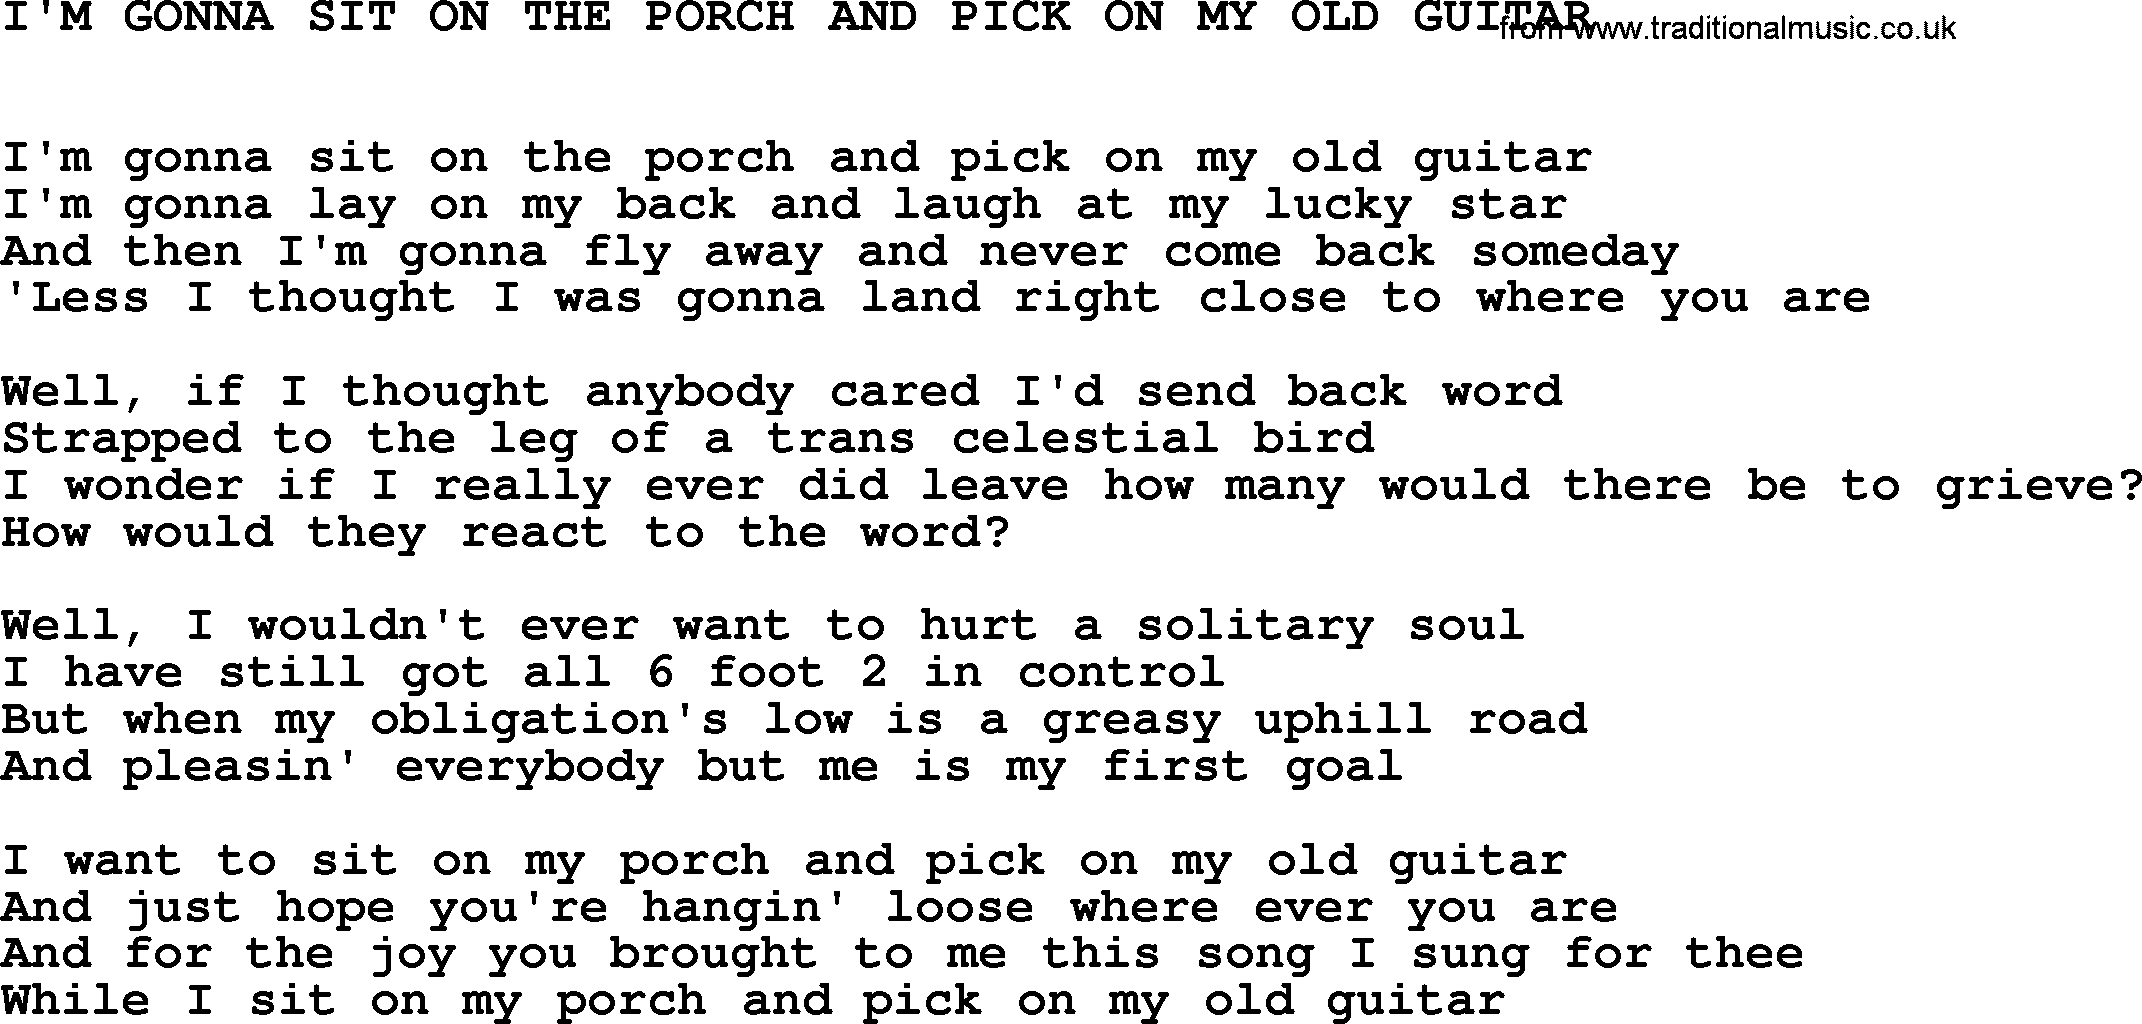 Johnny Cash song I'm Gonna Sit On The Porch And Pick On My Old Guitar.txt lyrics